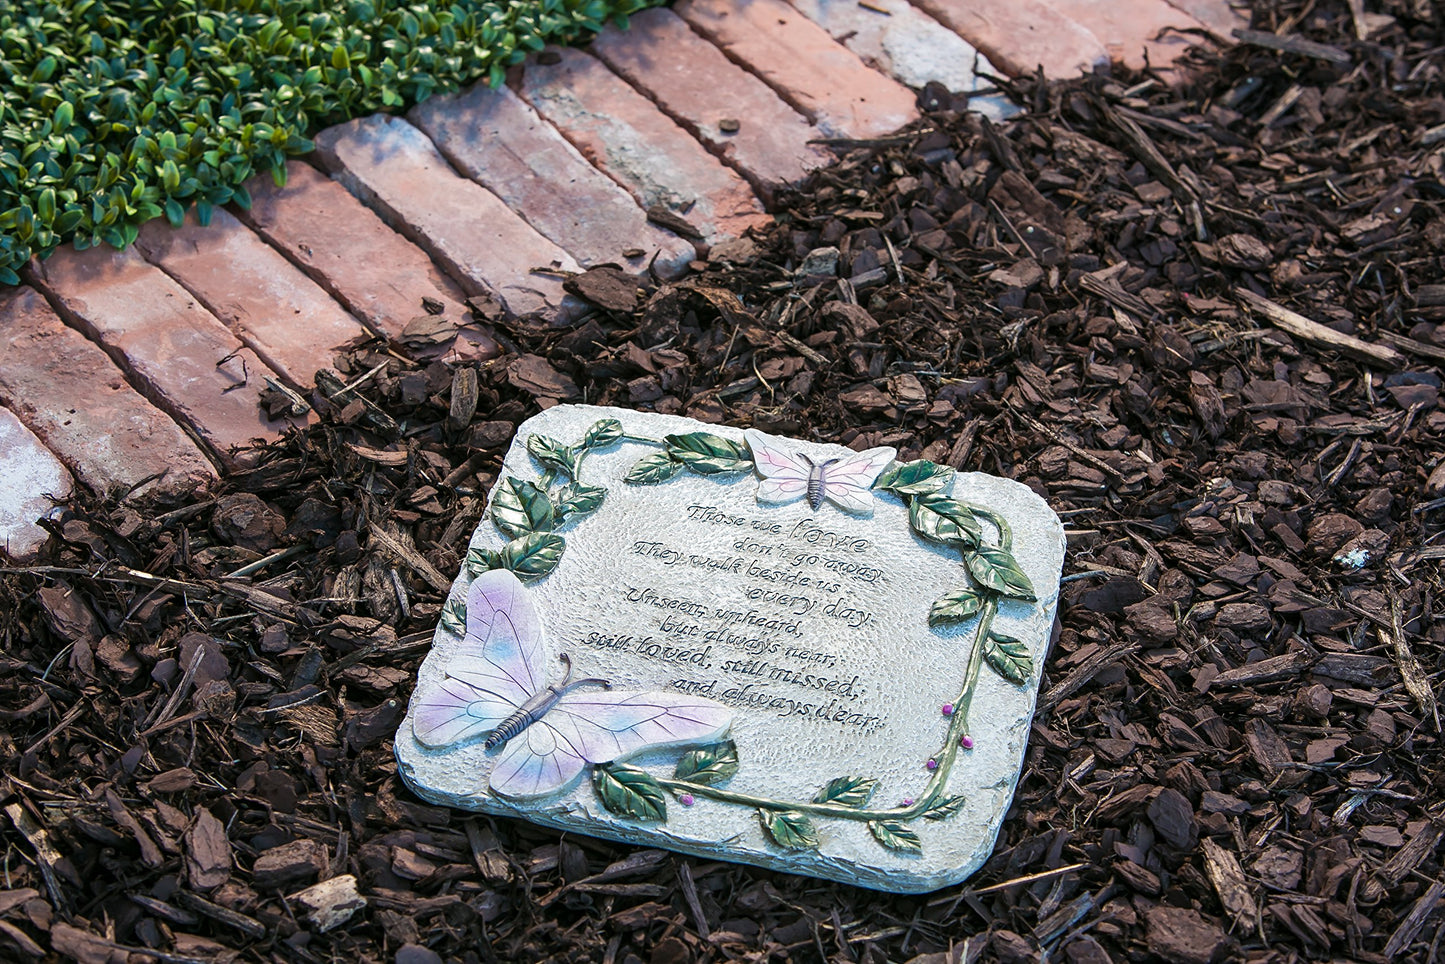 New Creative Evergreen Garden Those We Love Don’t Go Away Polystone Memorial Stepping Stone - 10”W x 1”D x 10”H